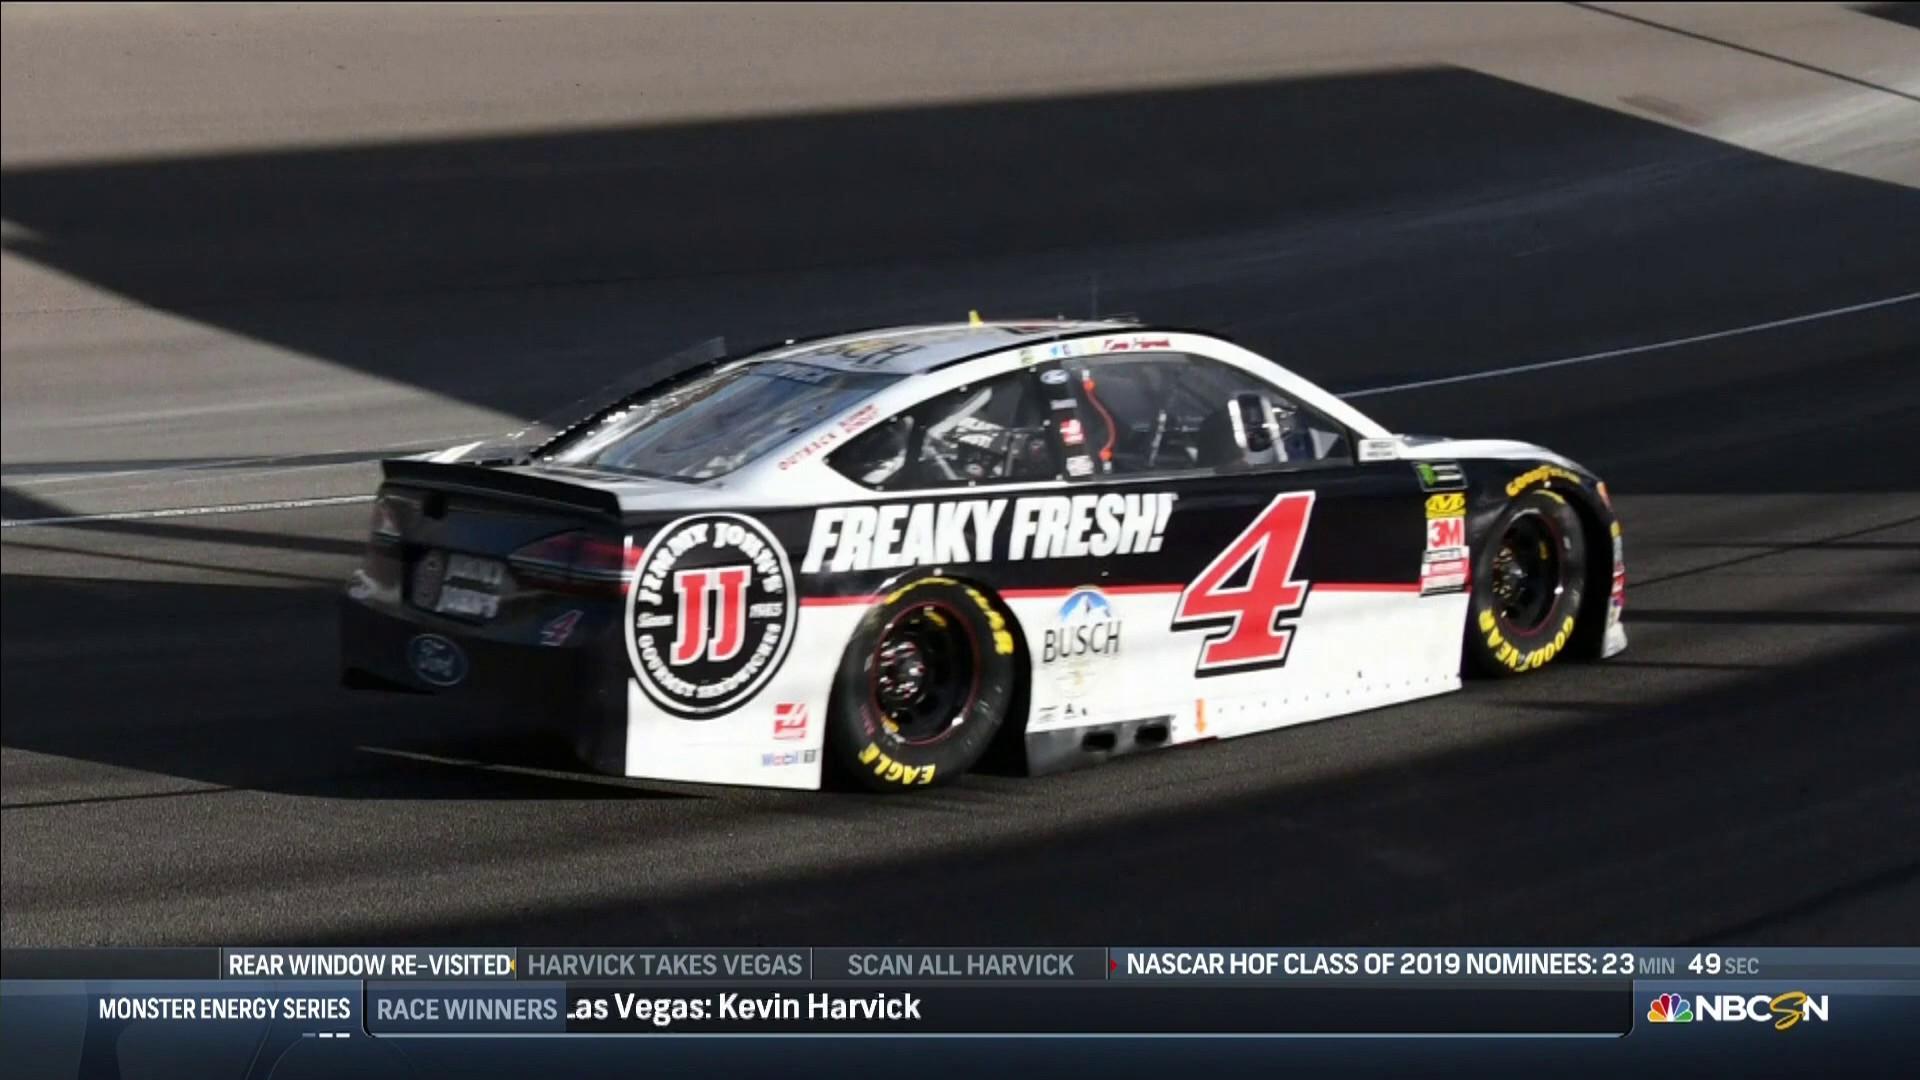 Kevin Harvick could be penalized over rear window controversy. NBC